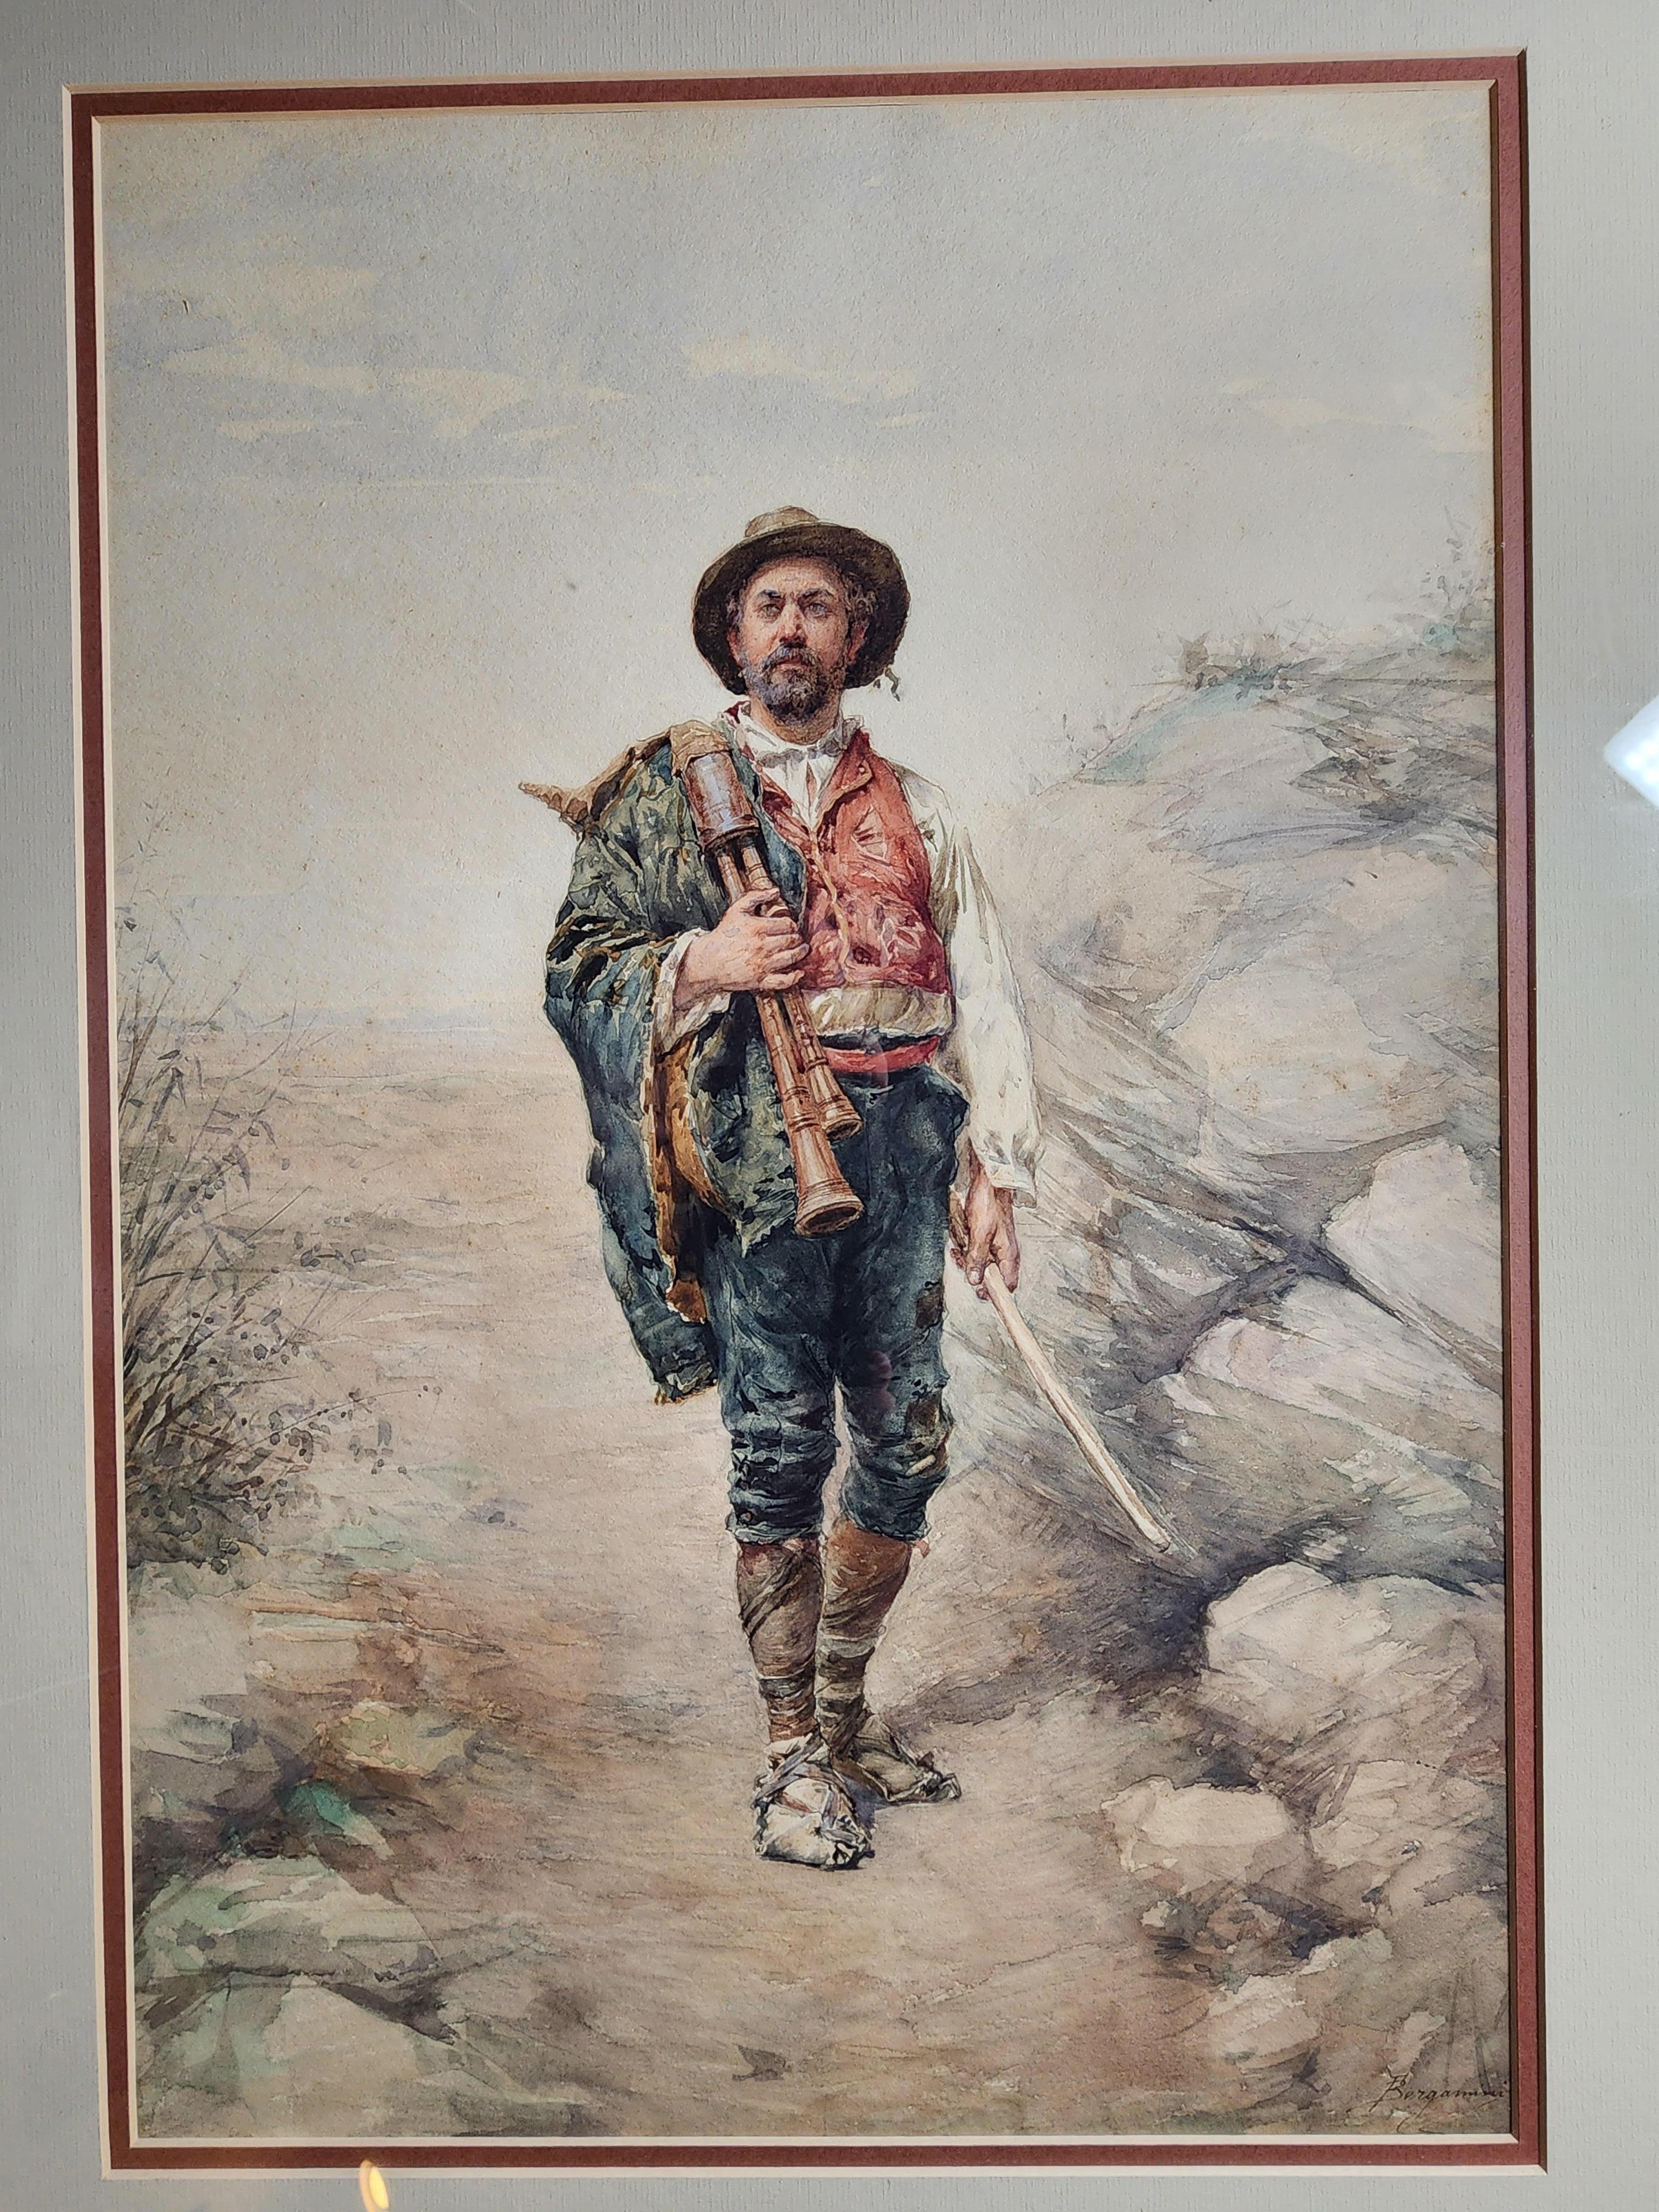 A superbly executed watercolor by Francesco Bergamini (1815-1883) of an Italian peasant carrying a Zampogna (the Italian version of bagpipes).

Zampogna are rarely shown in art.

Nicely framed and ready to hang. 